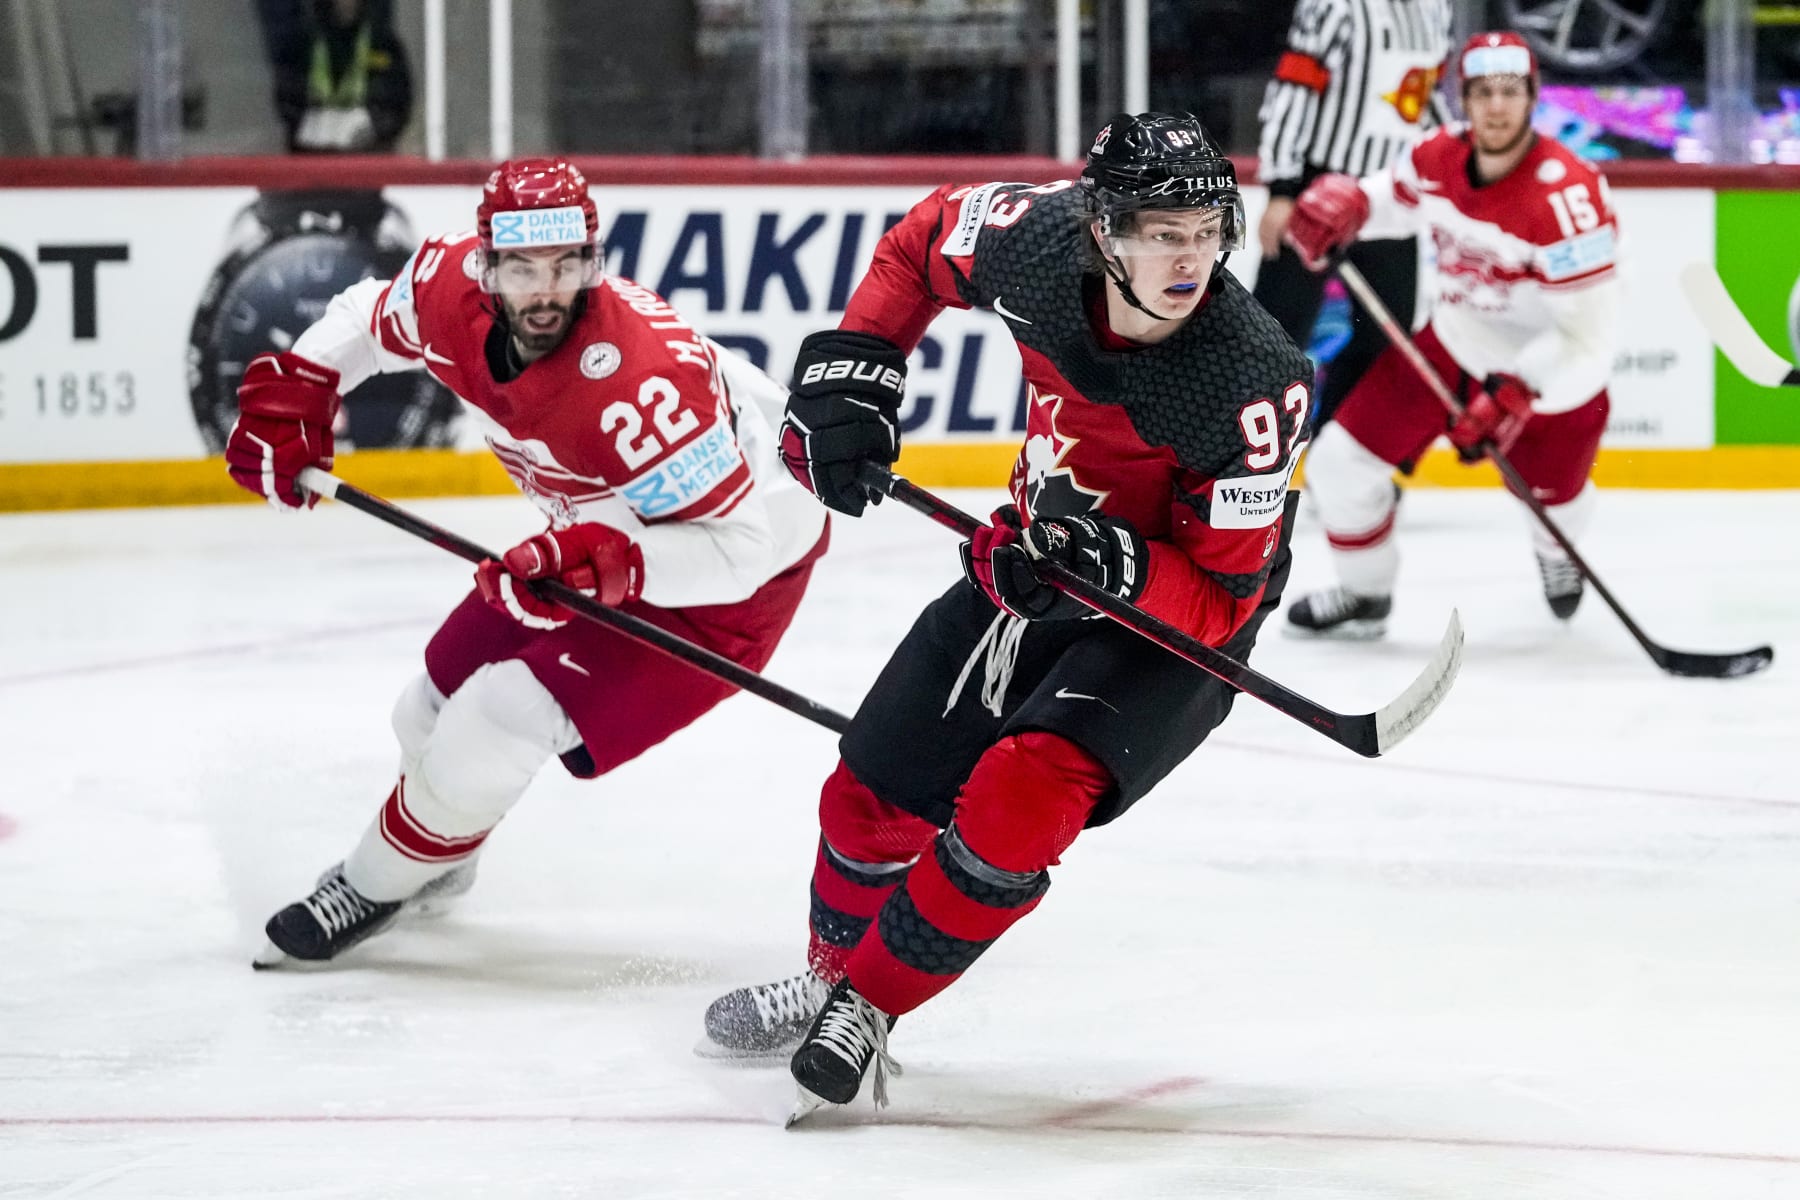 What you need to know ahead of the restaged 2022 World Junior